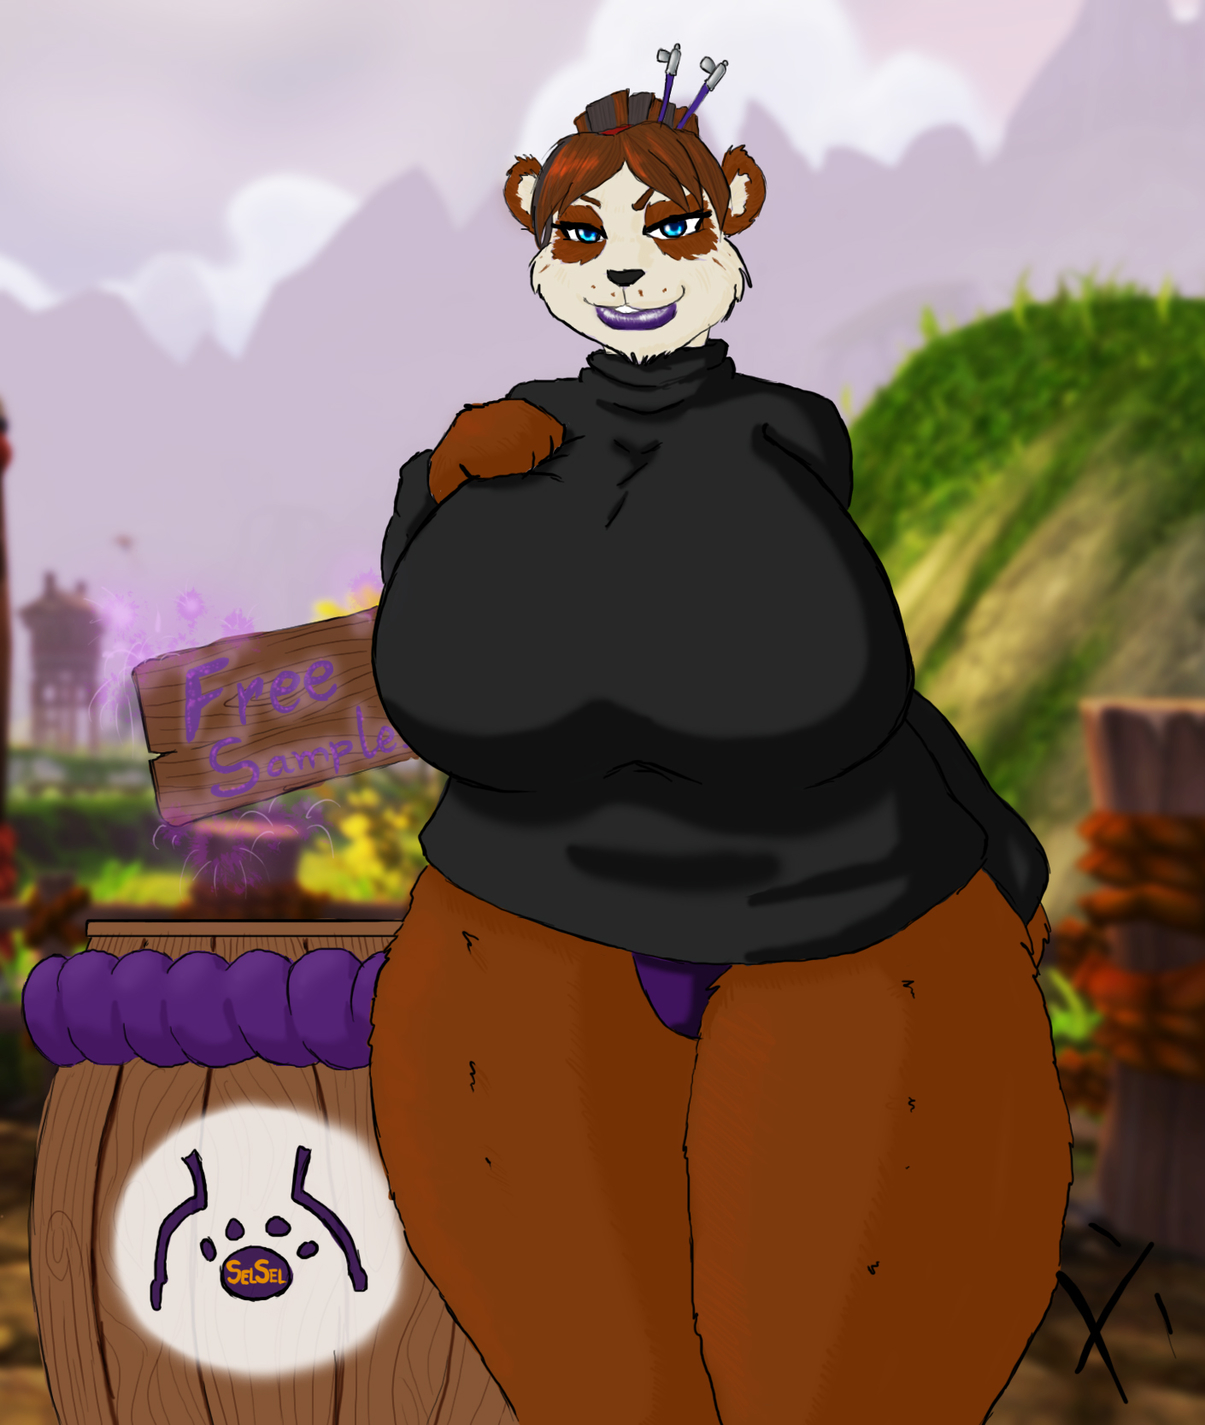 Selsel's Plum Brews [Pandaren/SFW/BBW] 
Selsel giving out free samples of her Plum-brew.
Commission by Ethernal. 2013.
[url=http://www.hentai-foundry.com/user/Eternal/profile][Link to his HF page][/url]
Keywords: Pandaren;SFW;OC;BBW;Drawn